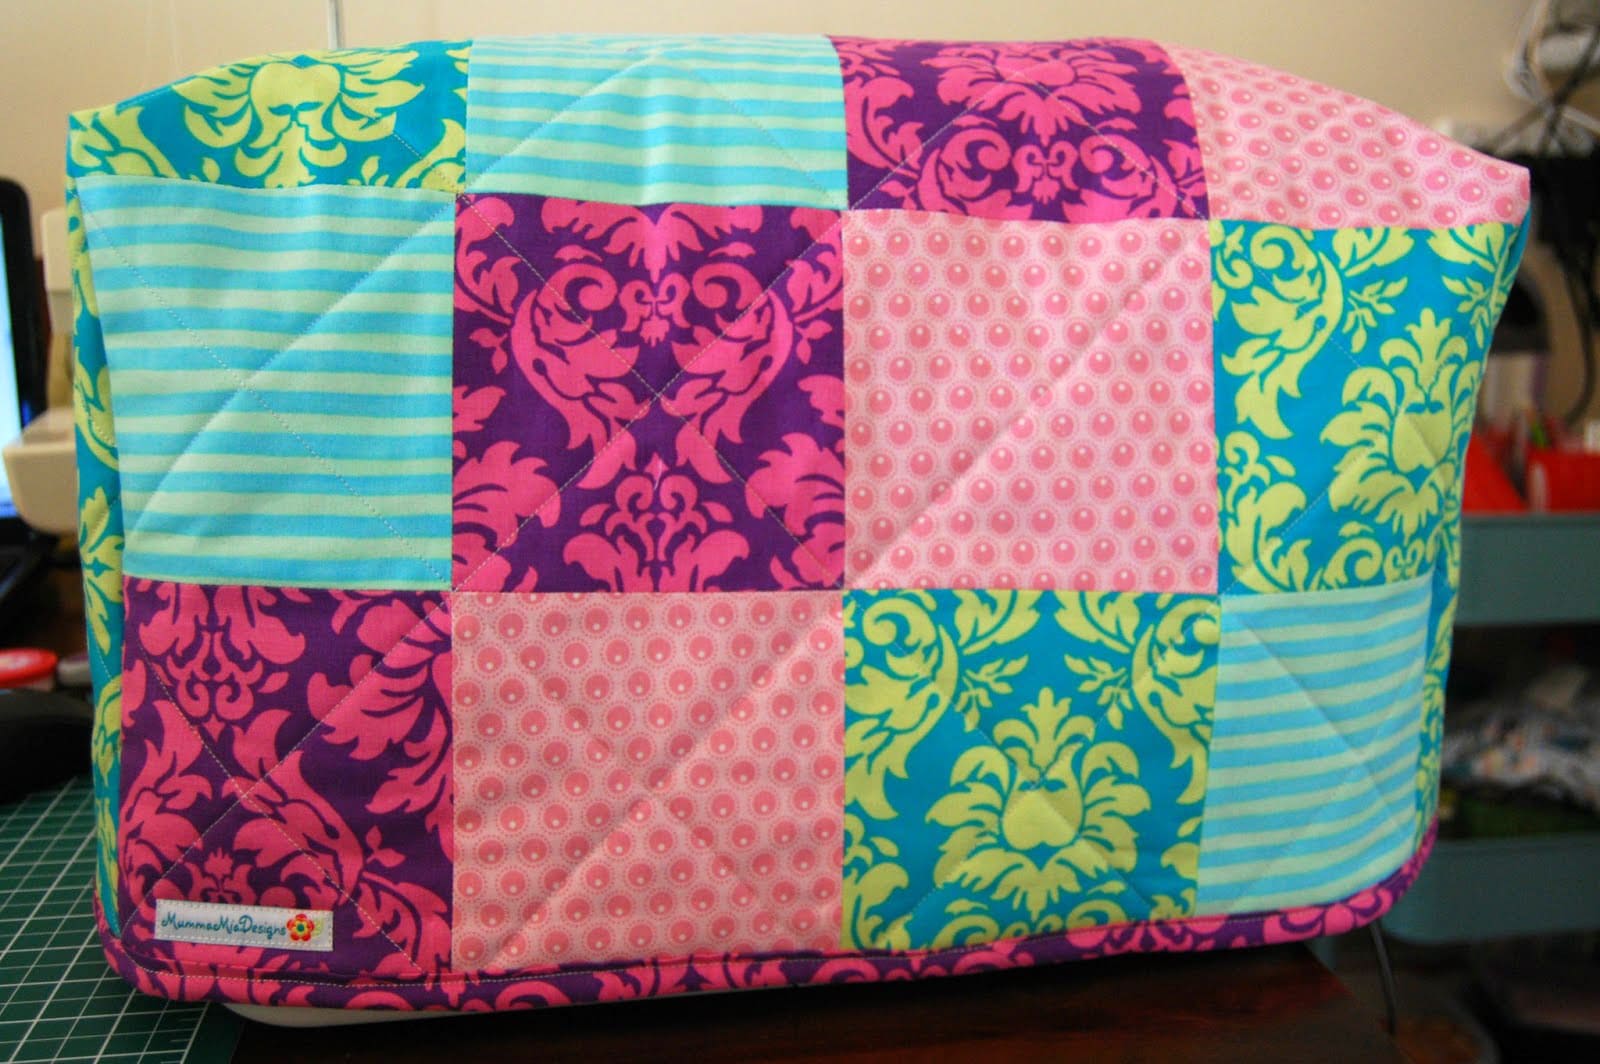 Quilted Sewing Machine Cover Tutorial ~ DIY Tutorial Ideas!